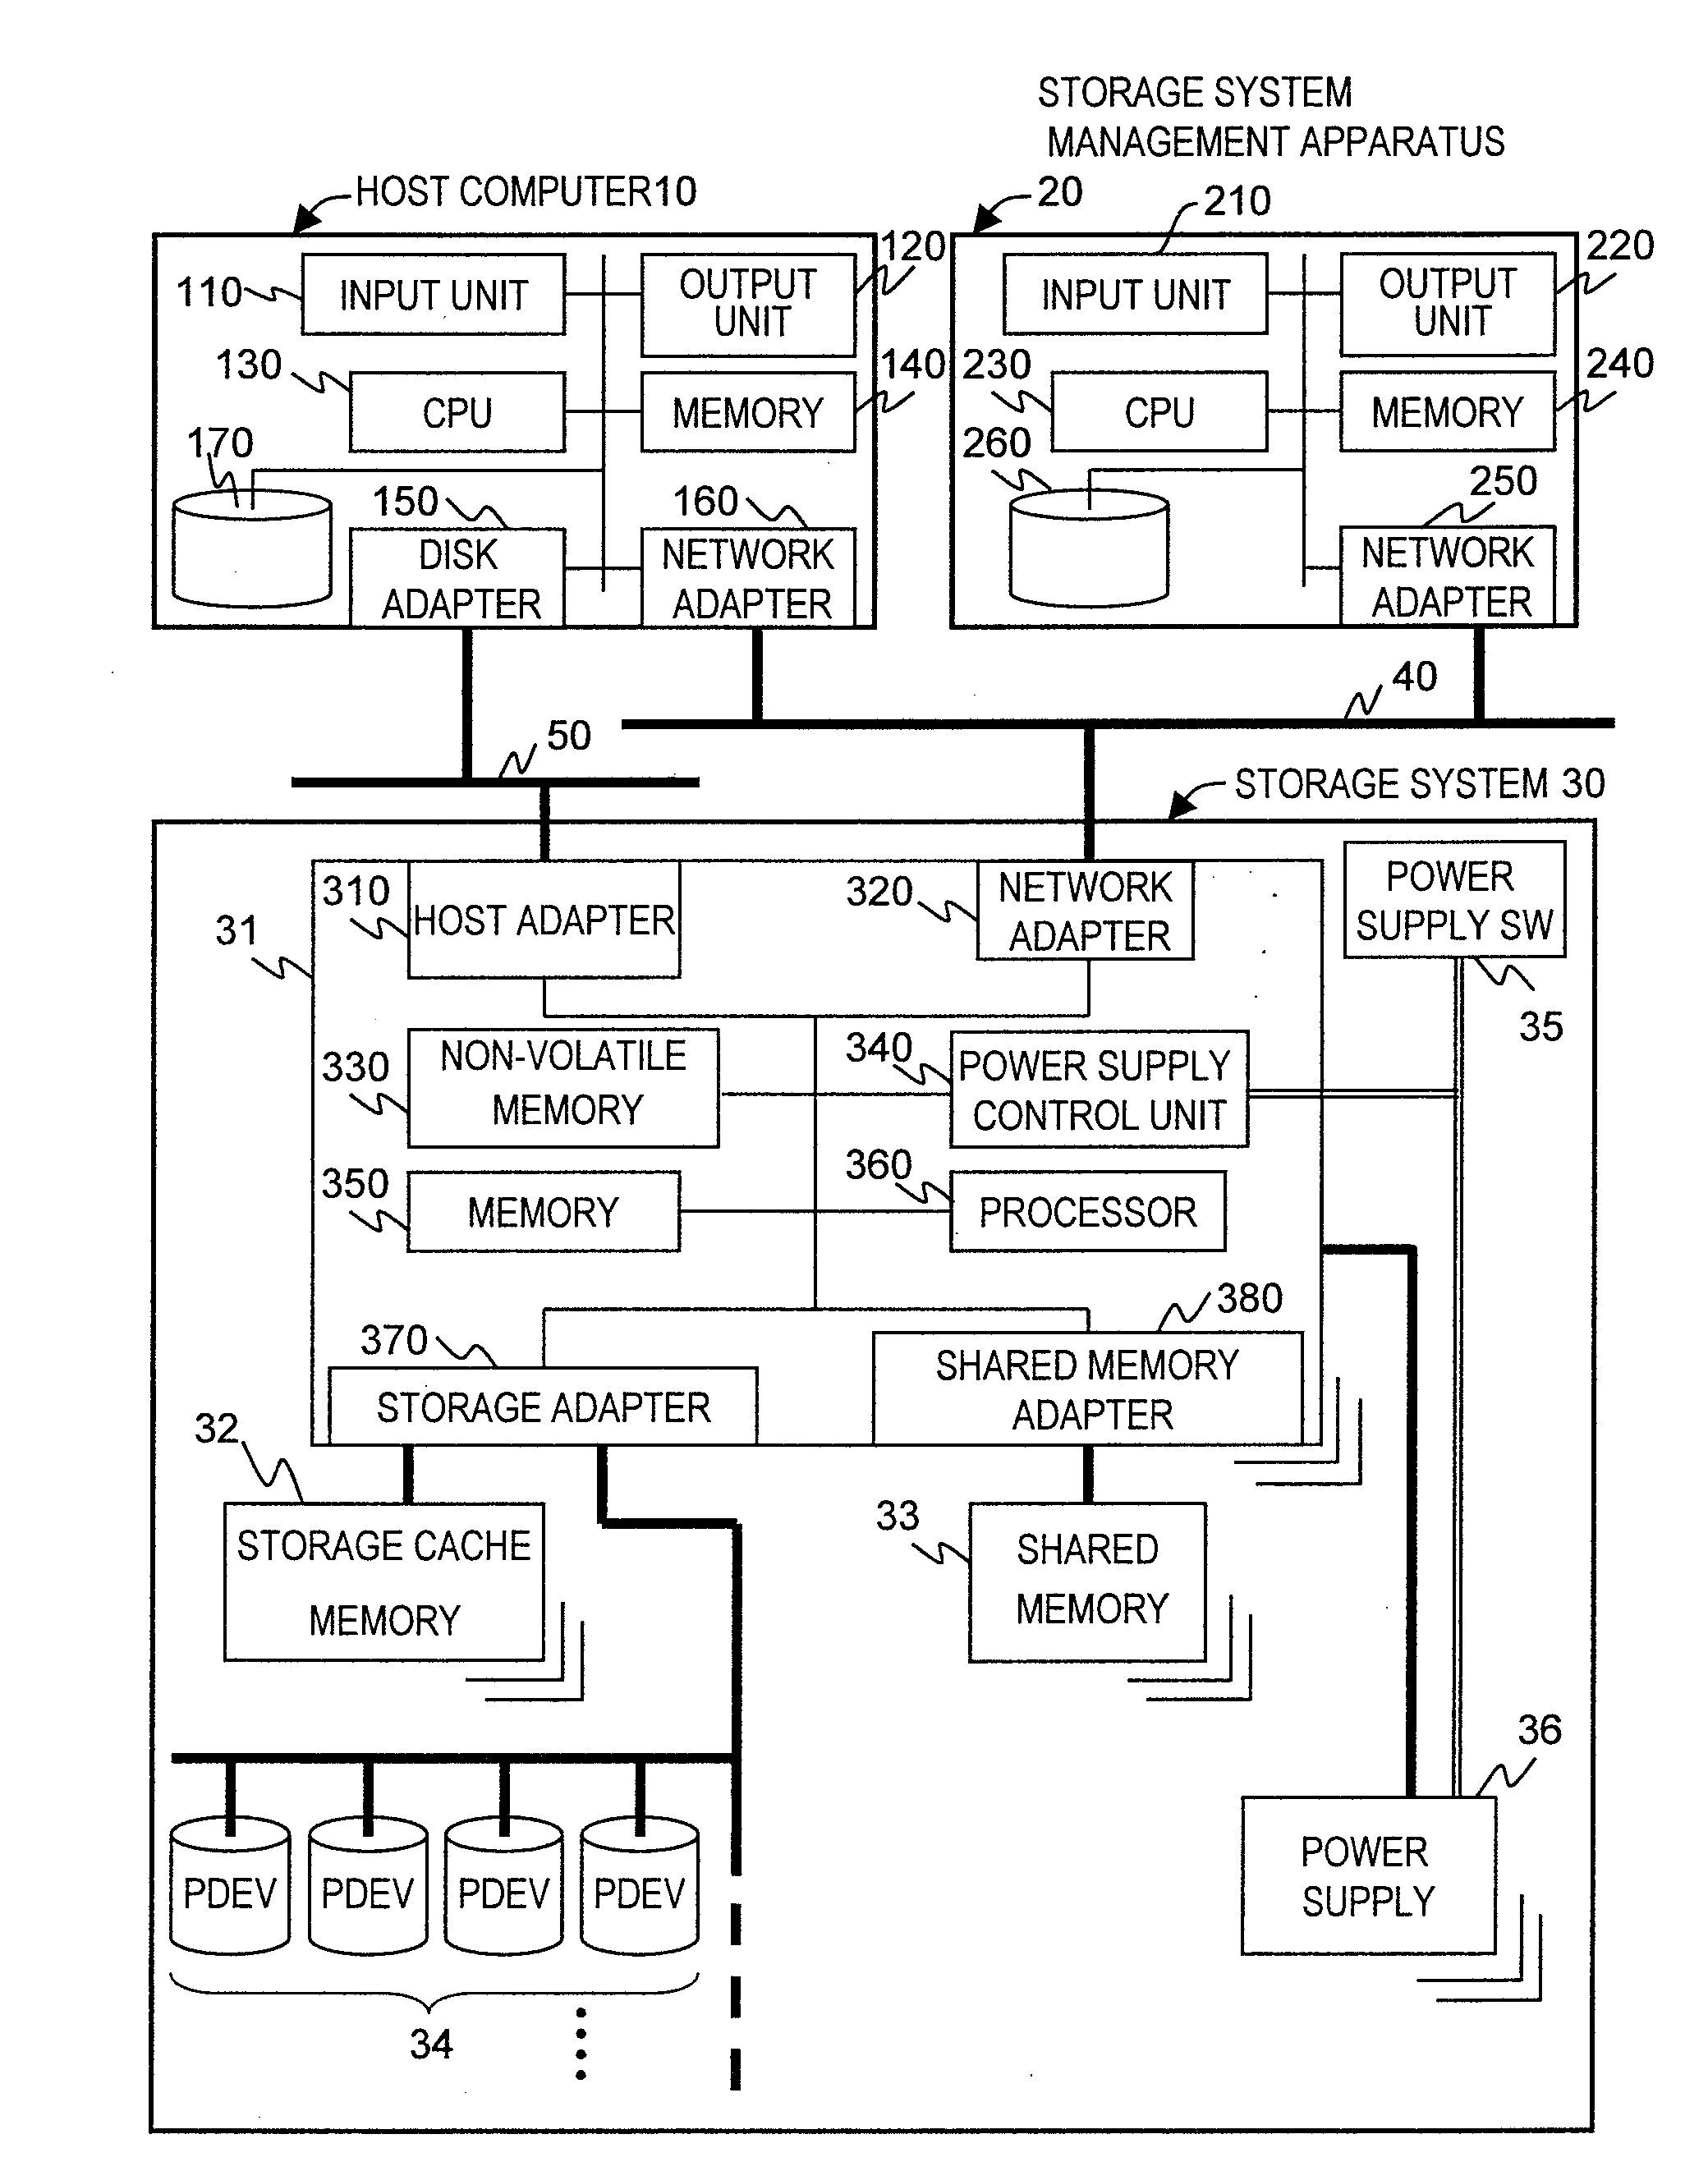 Storage system for a storage pool and virtual volumes